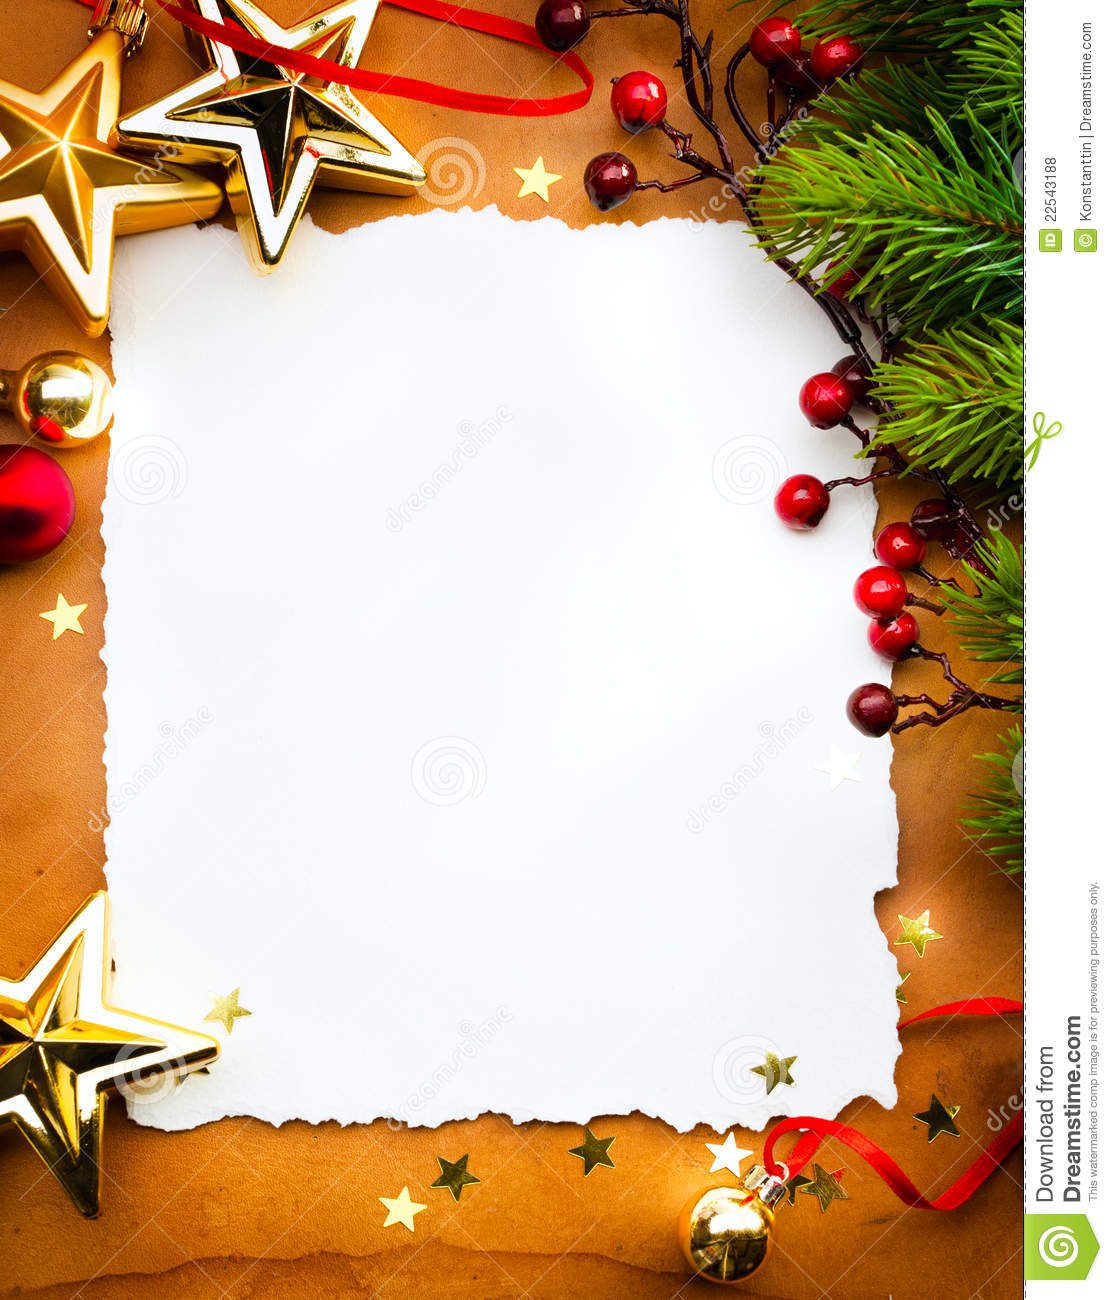 Christmas Greeting Card Paper On Red Backgroun Stock Photo